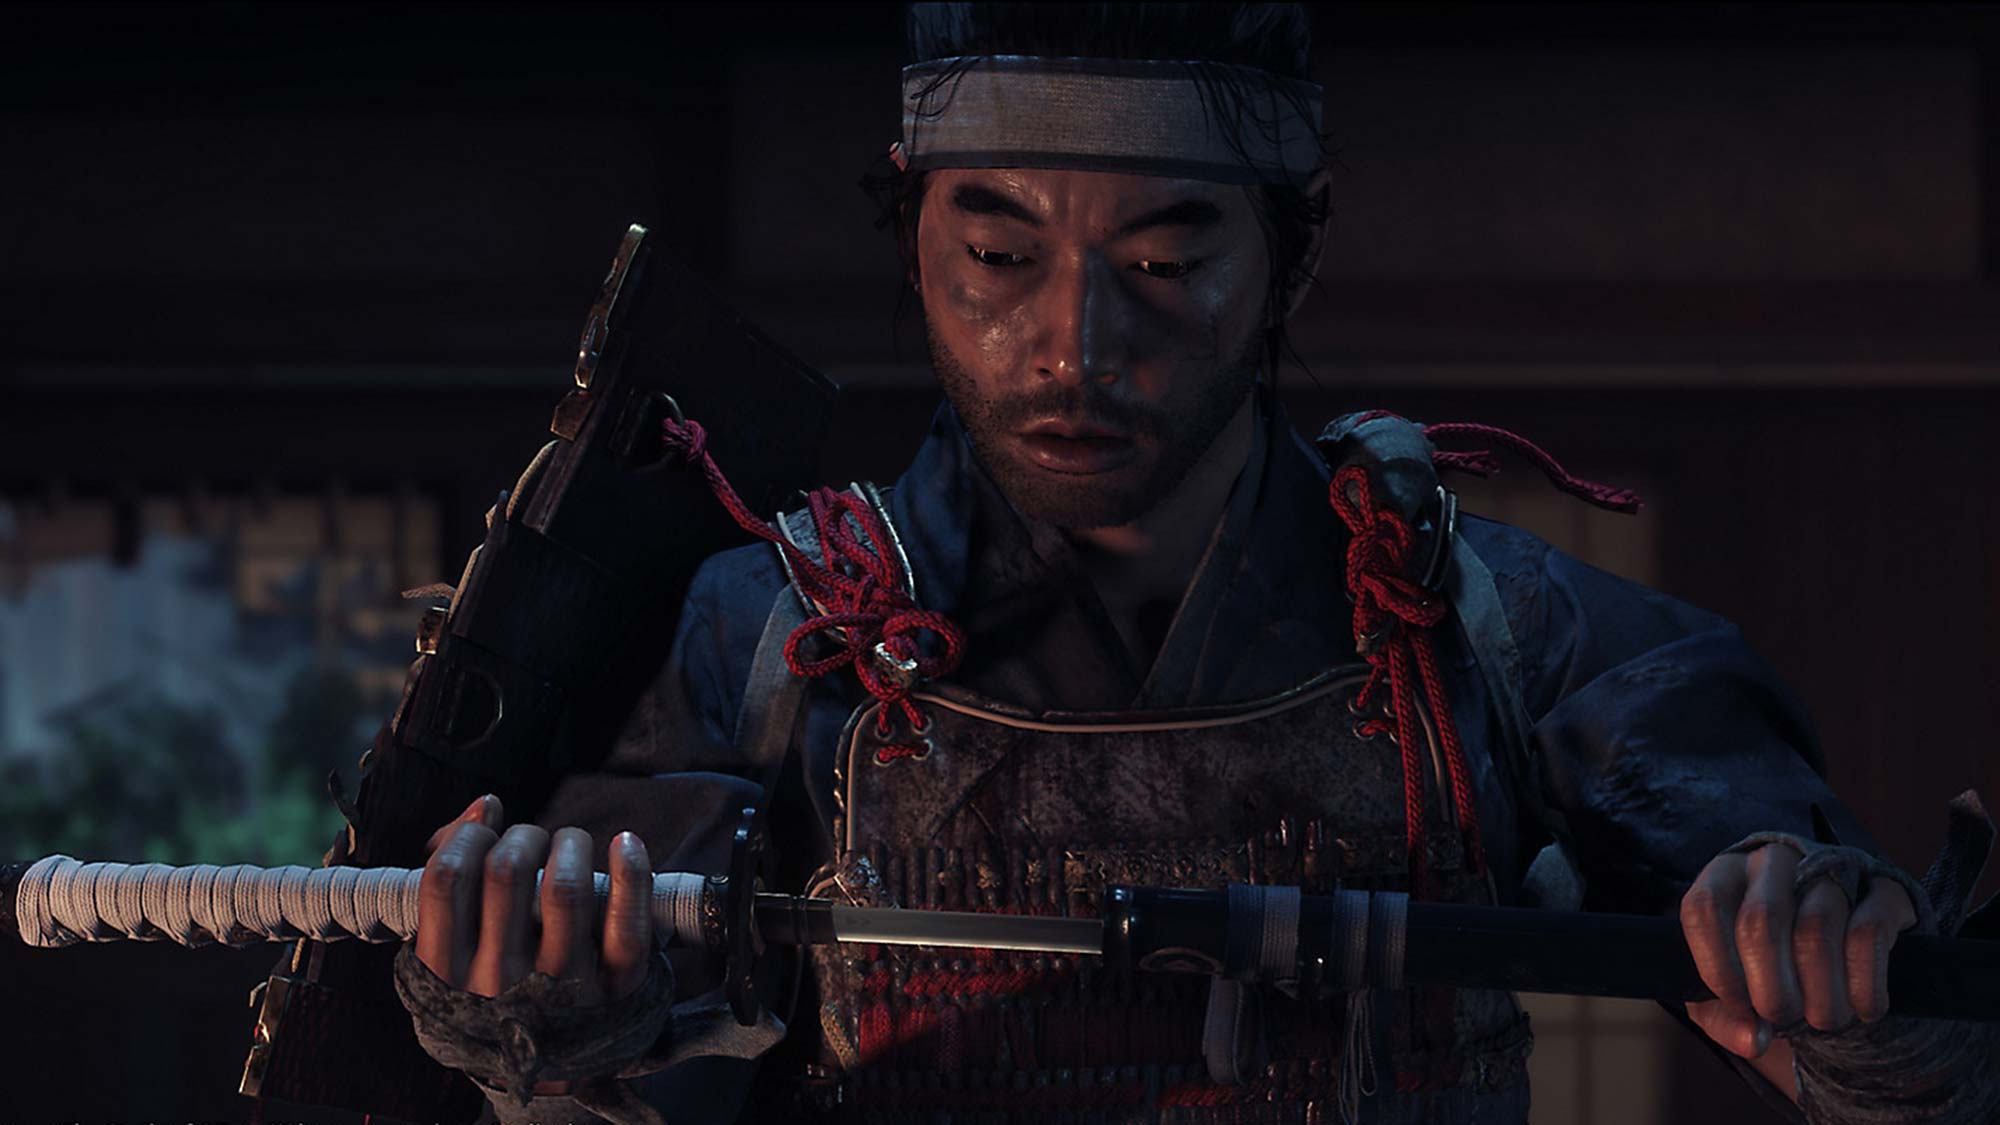 Ghost of Tsushima Review: A Stylish Samurai Tale - Fextralife